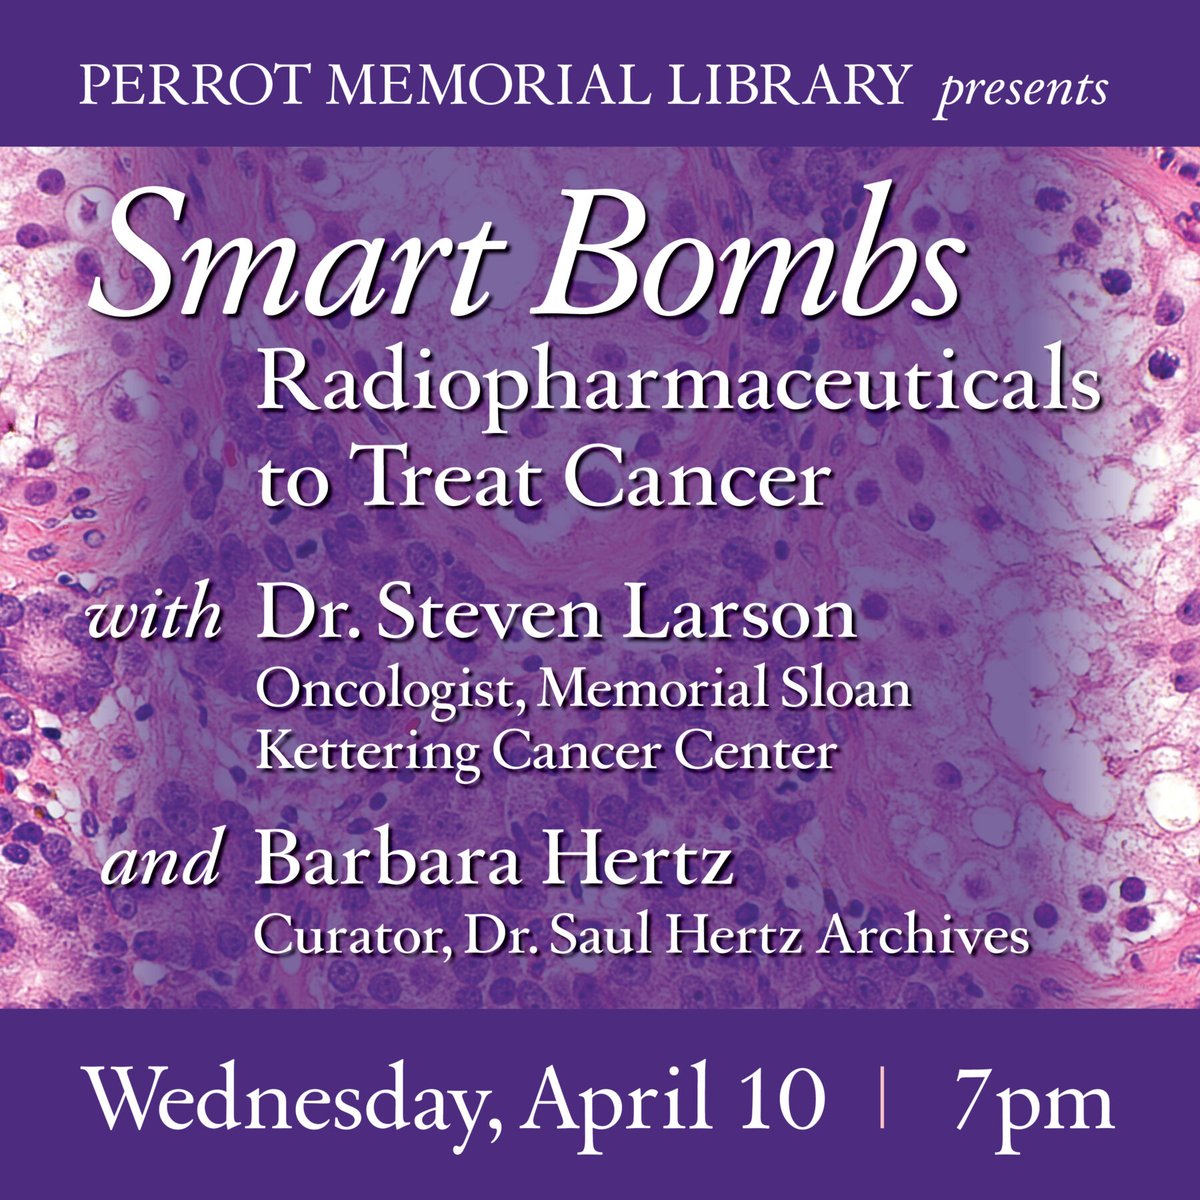 For those of you near NYC/CT area.... an interesting lecture on the use of #radiopharmaceuticals as a therapeutic tool against #cancer. 𝐖𝐞𝐝𝐧𝐞𝐬𝐝𝐚𝐲, 𝐀𝐩𝐫𝐢𝐥 10, · 7𝐩𝐦 𝐄𝐃𝐓 𝐏𝐞𝐫𝐫𝐨𝐭 𝐌𝐞𝐦𝐨𝐫𝐢𝐚𝐥 𝐋𝐢𝐛𝐫𝐚𝐫𝐲 (CT 06870 USA)